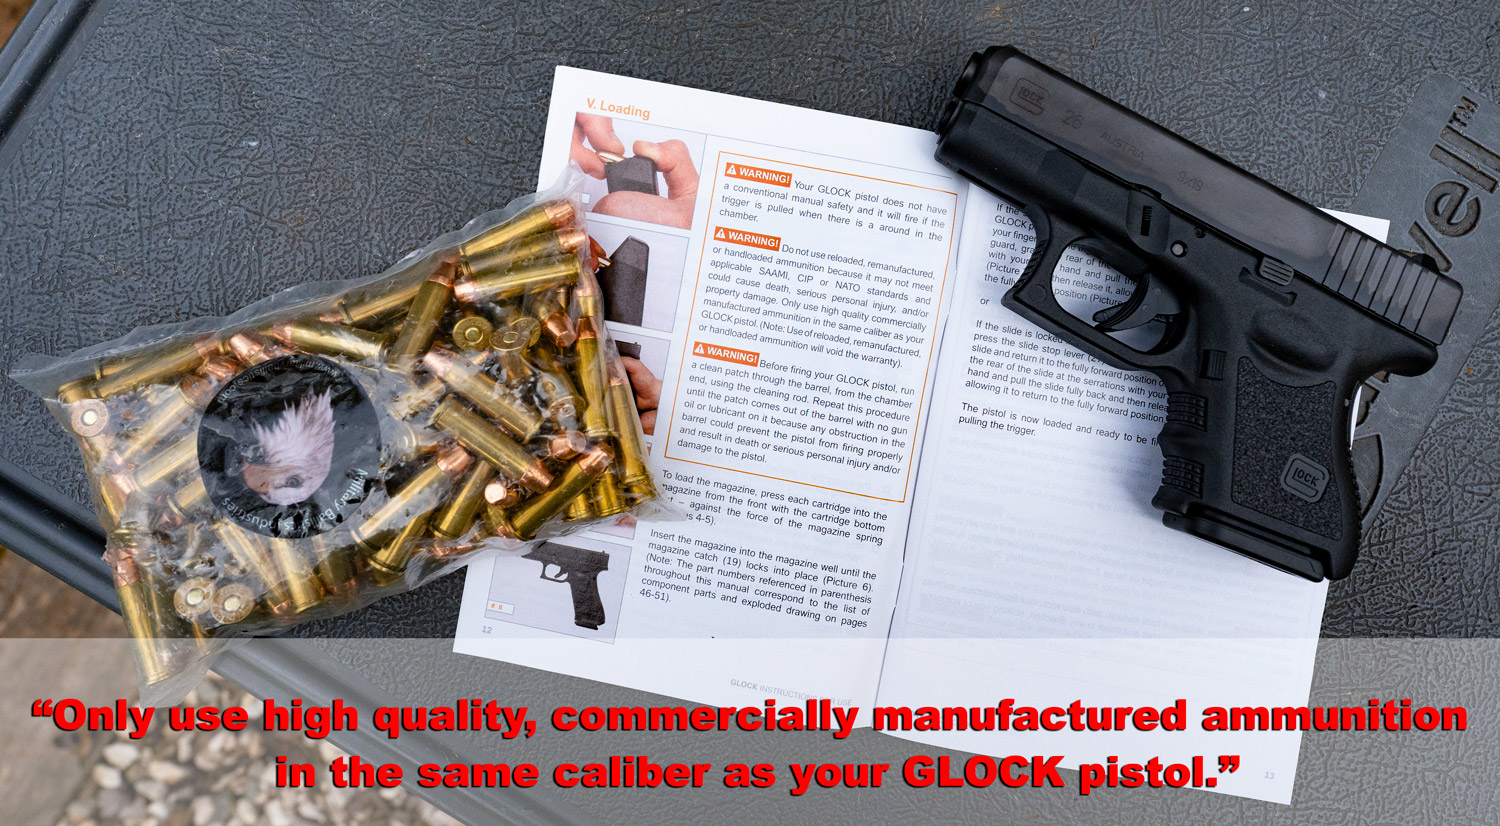 Glock owners manual with ammo and firearm